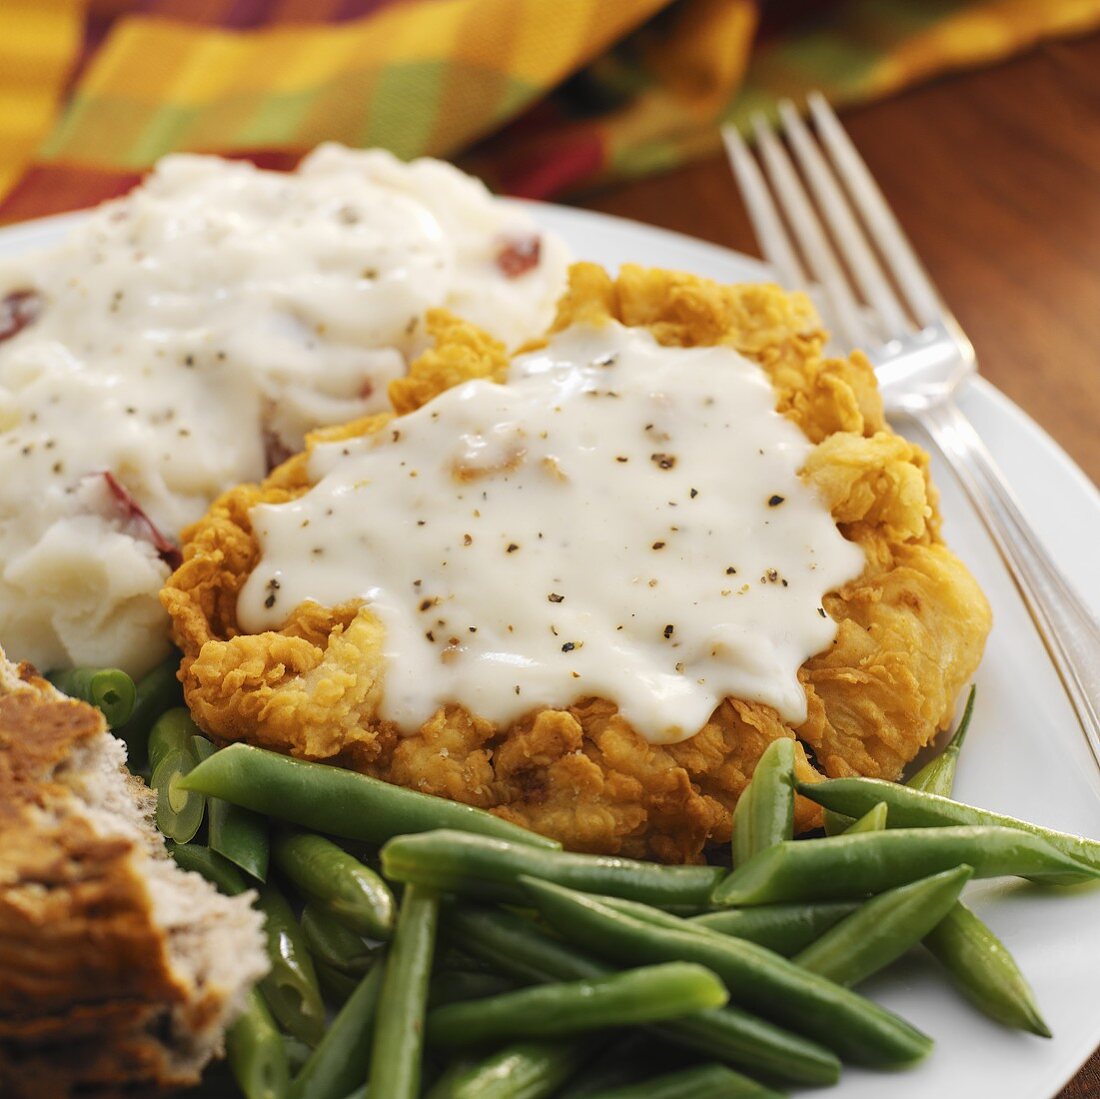 Chicken-fried Steak with Mashed Potatoes; Green Beans